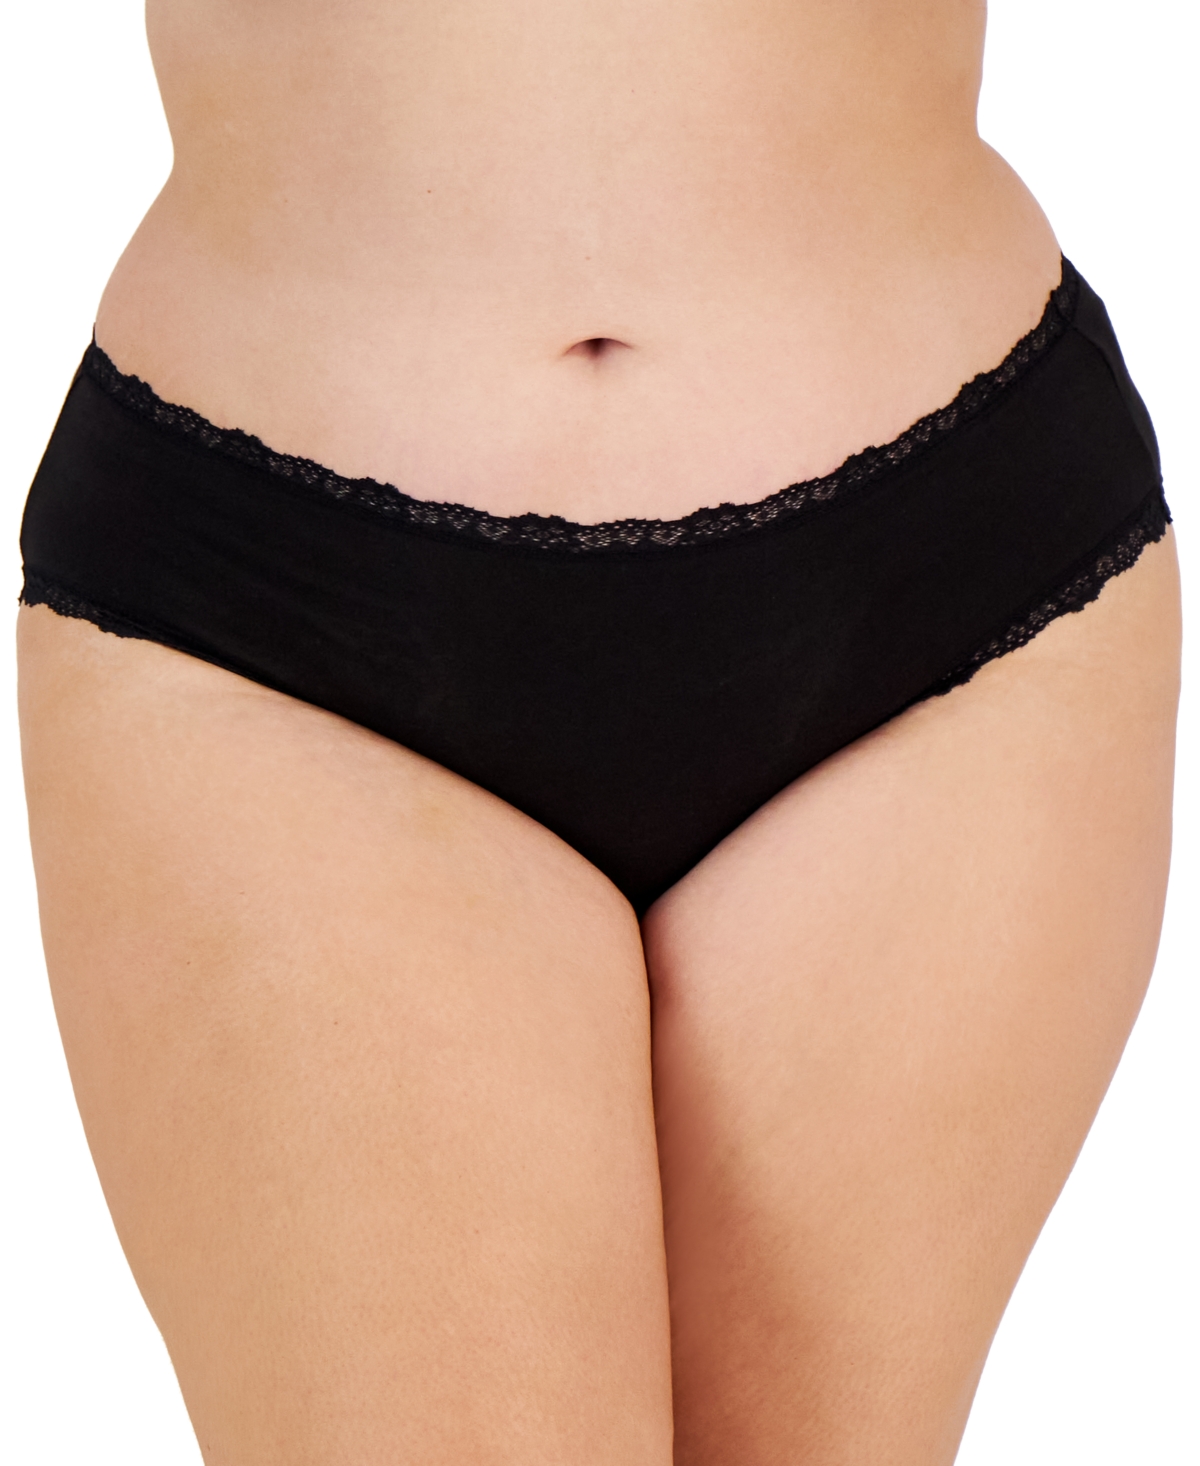 Personalized Panties Plus Size Black Cheeky with Lace Trim on the bottom *  FAST SHIPPING * - Sizes X, XL, 2XL, 3XL and 4XL